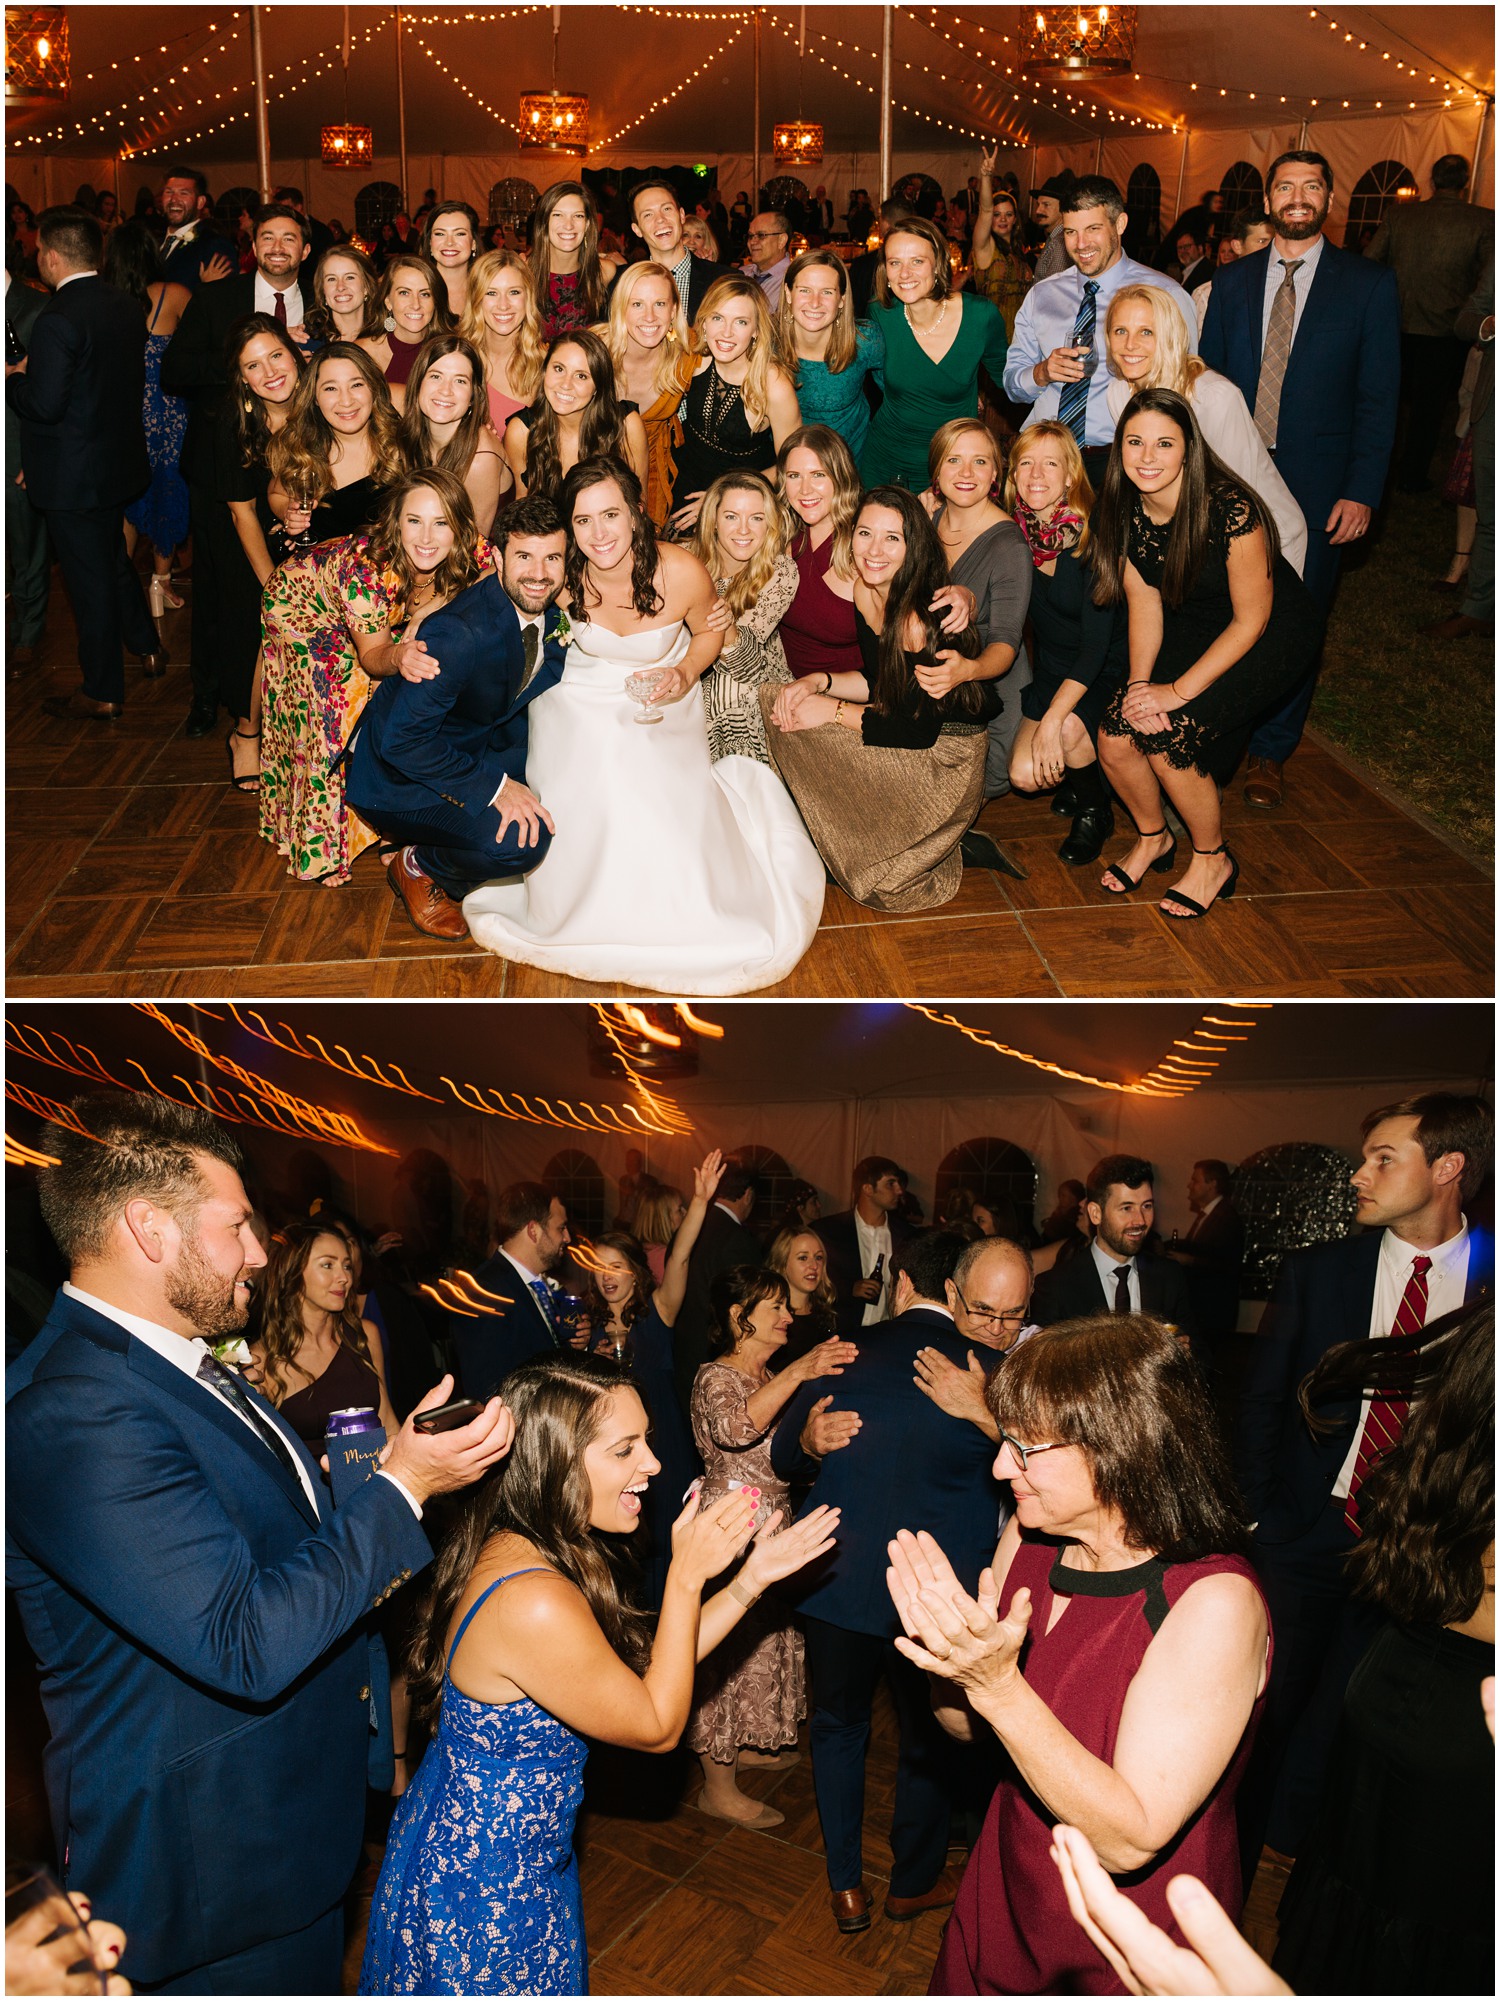 reception dancing and fun at Lake Eden Events wedding